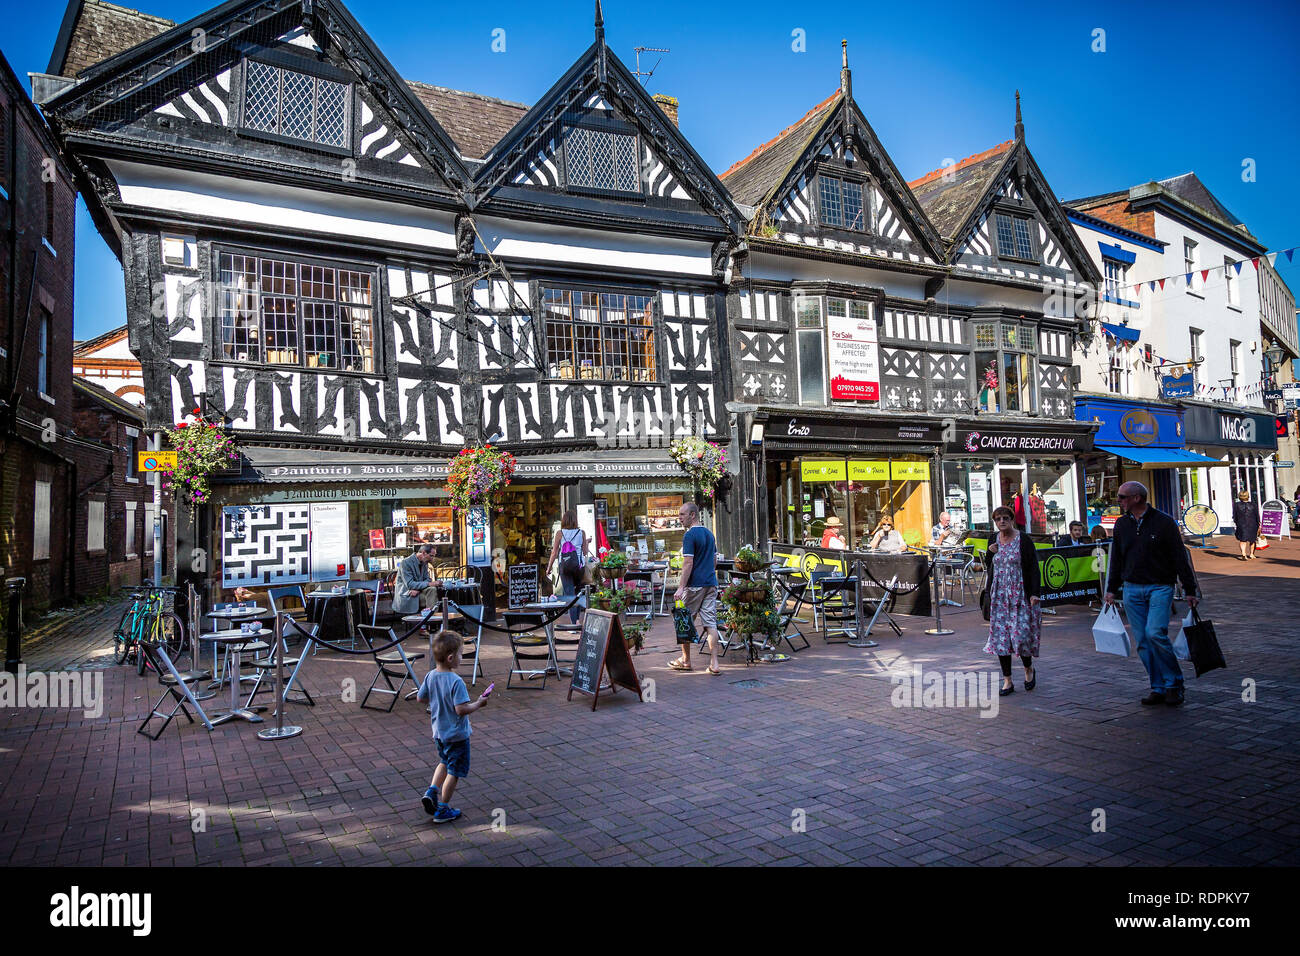 Half timbered Elizabethan buildings in High Street, Nantwich, Cheshire, UK taken on 1 September 2014 Stock Photo